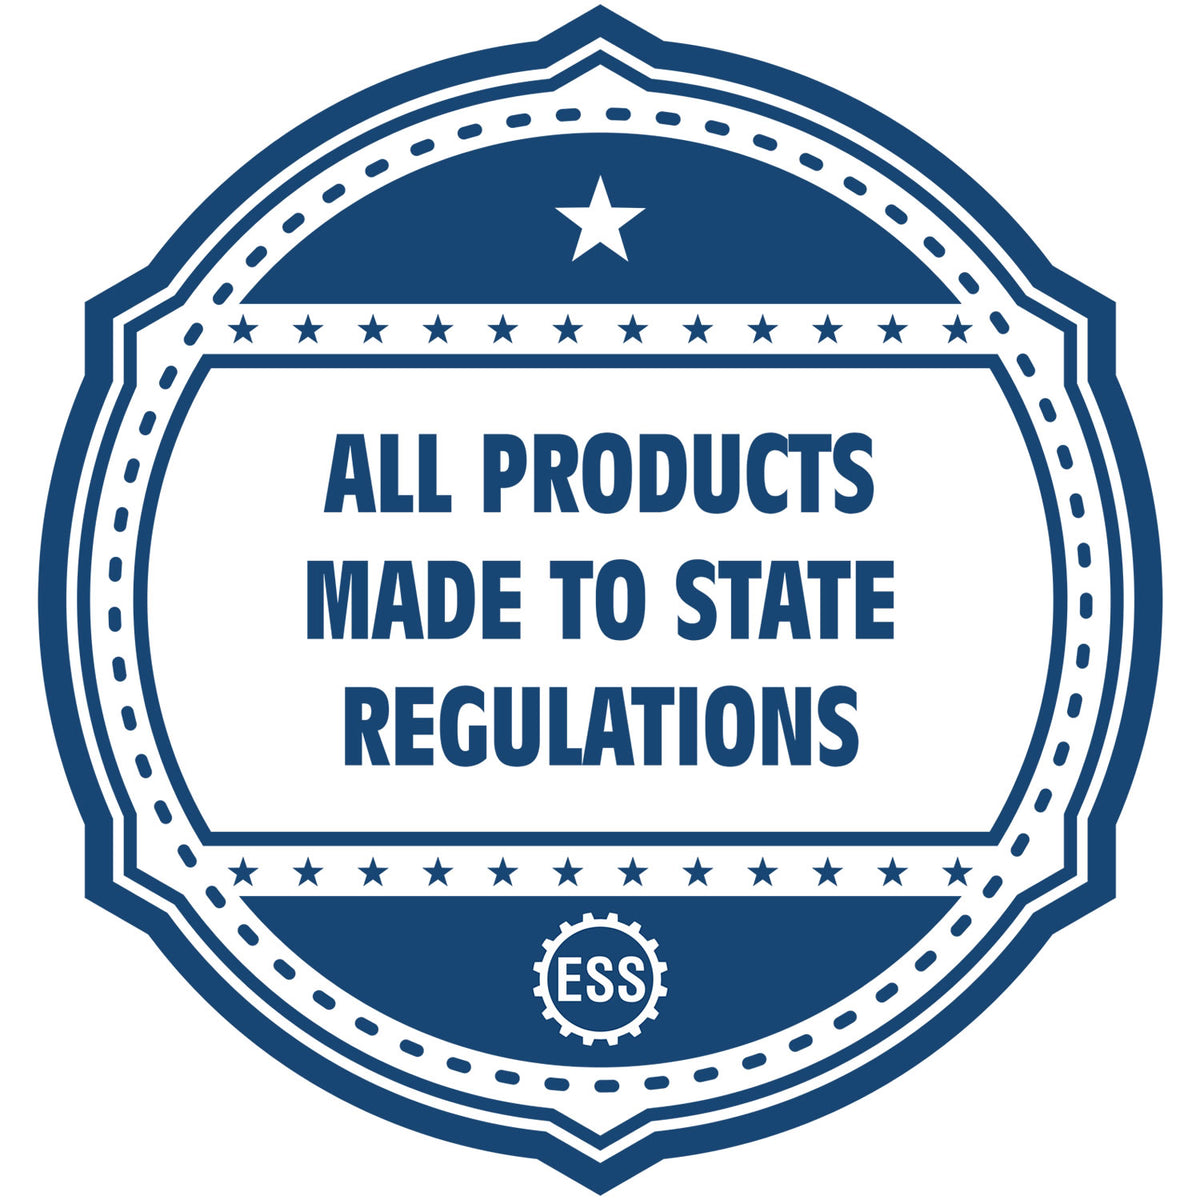 An icon or badge element for the Slim Pre-Inked Iowa Land Surveyor Seal Stamp showing that this product is made in compliance with state regulations.